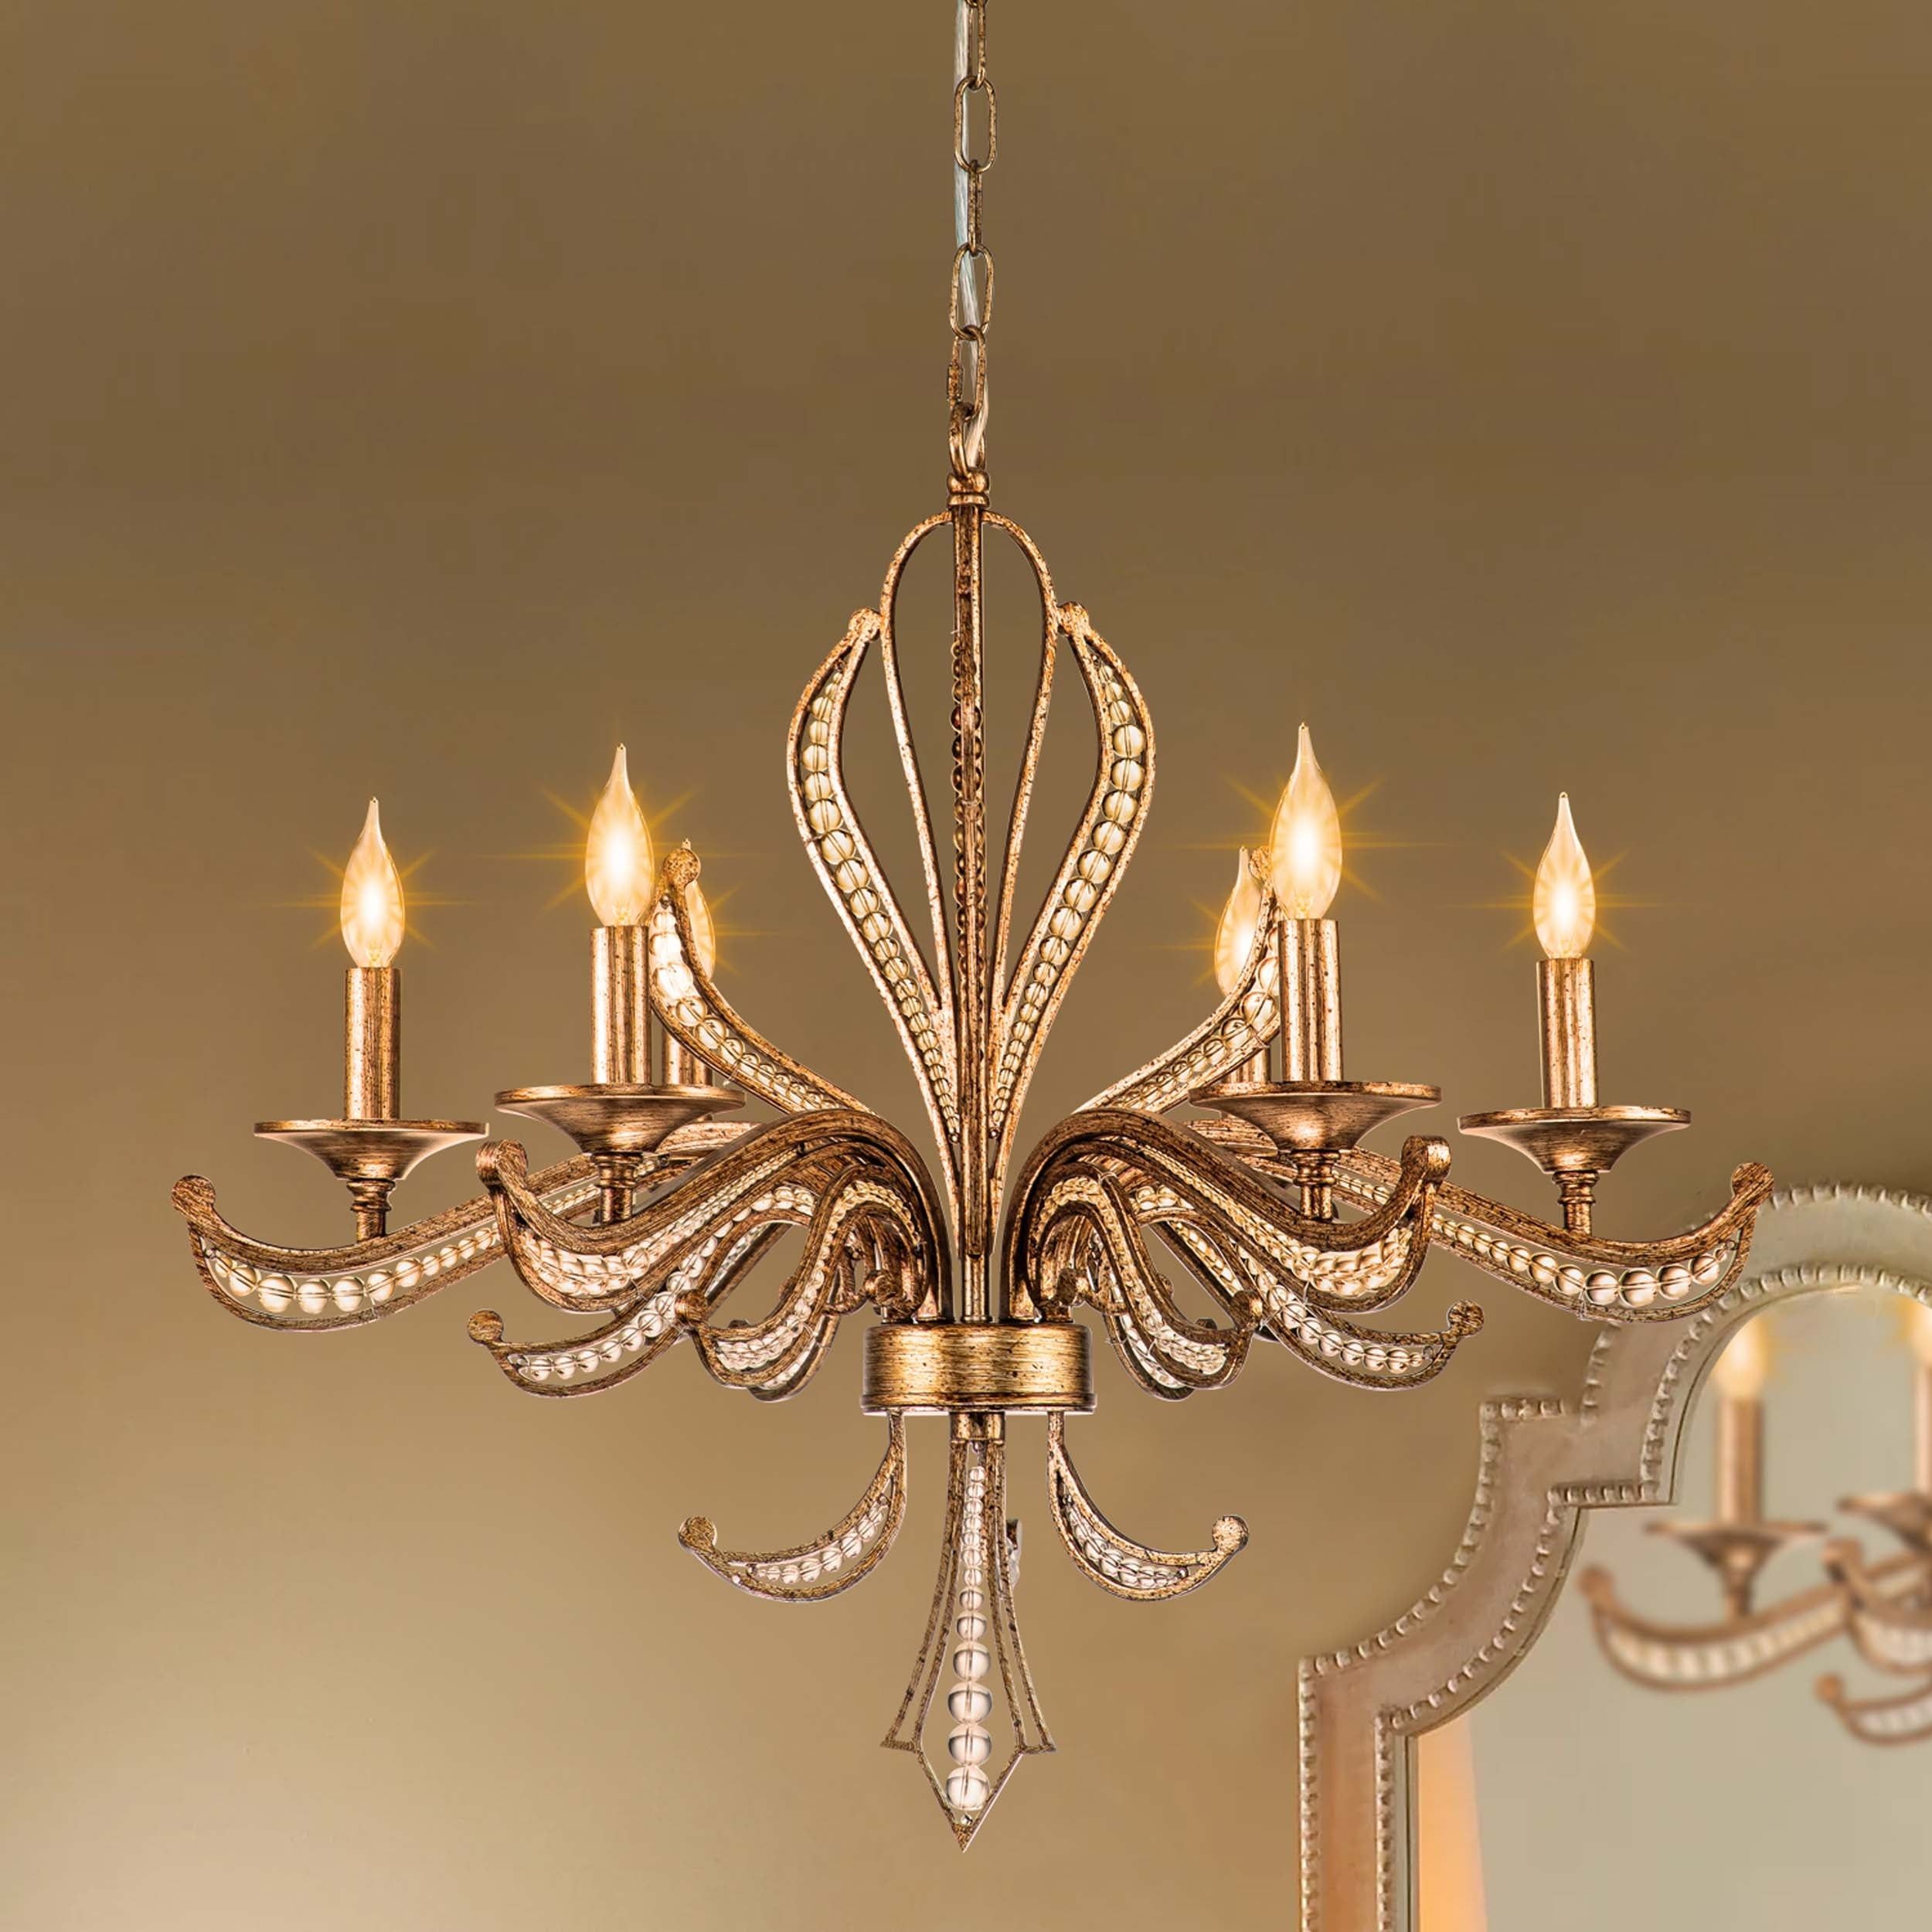 Elegant Chandelier Lighting Stunning and Sophisticated Lighting Fixture for Your Home